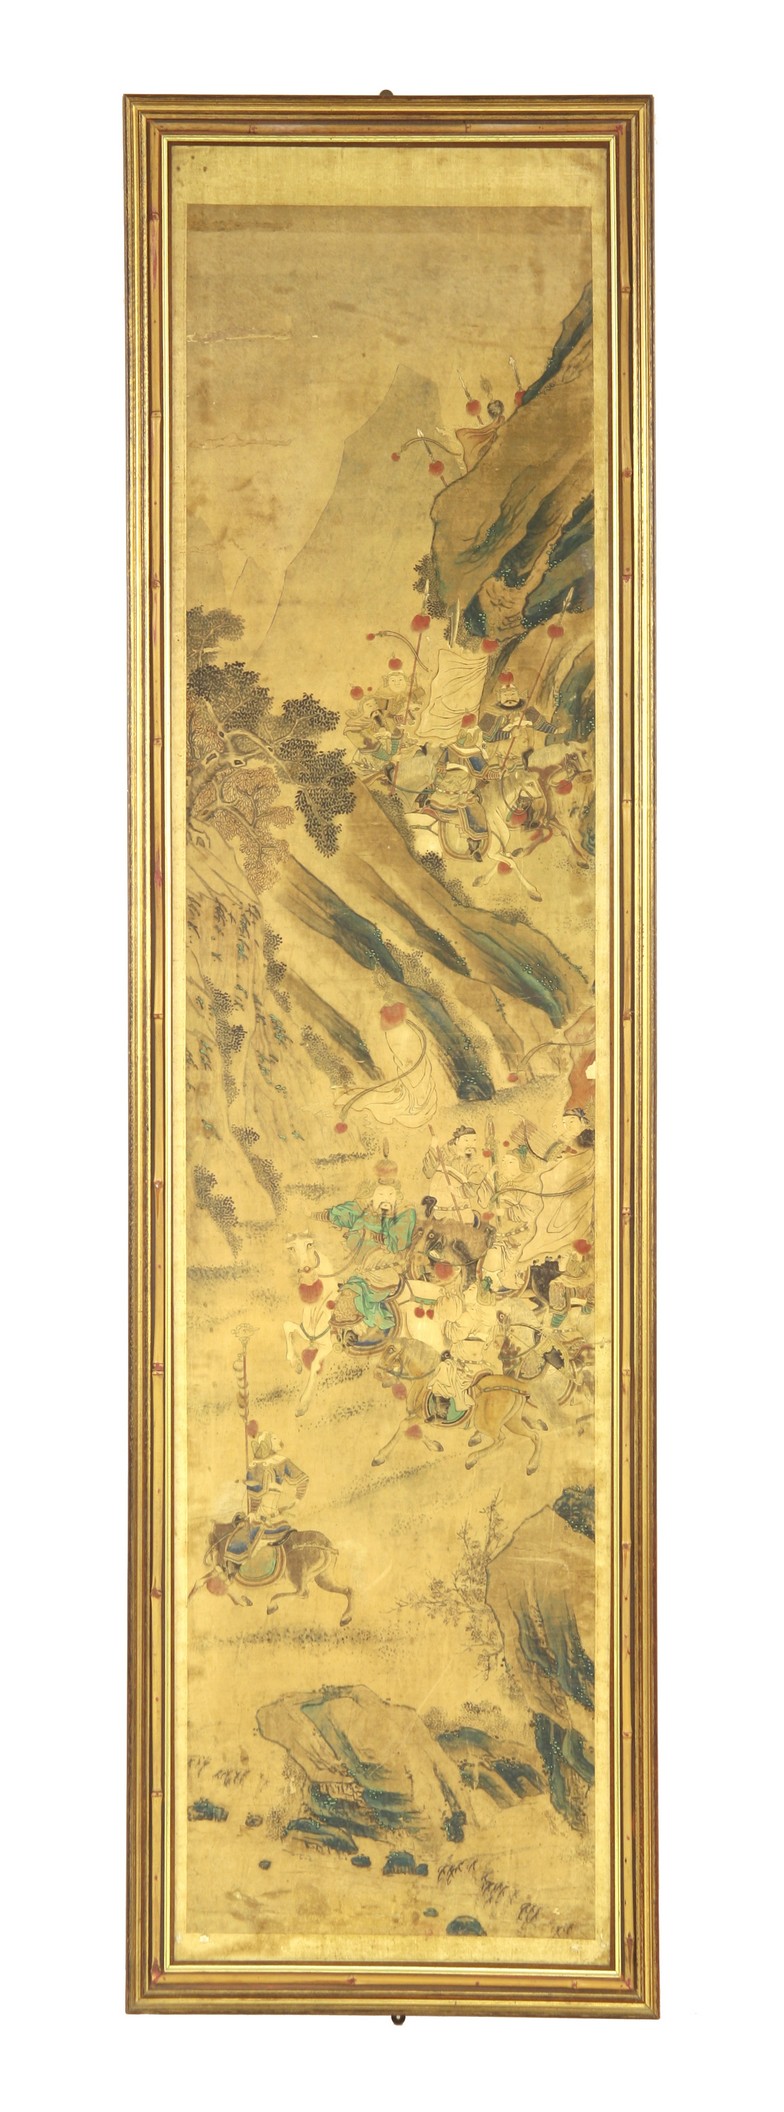 A rare set of twelve Scroll Paintings,
probably mid-19th century, ink and colour on paper, with